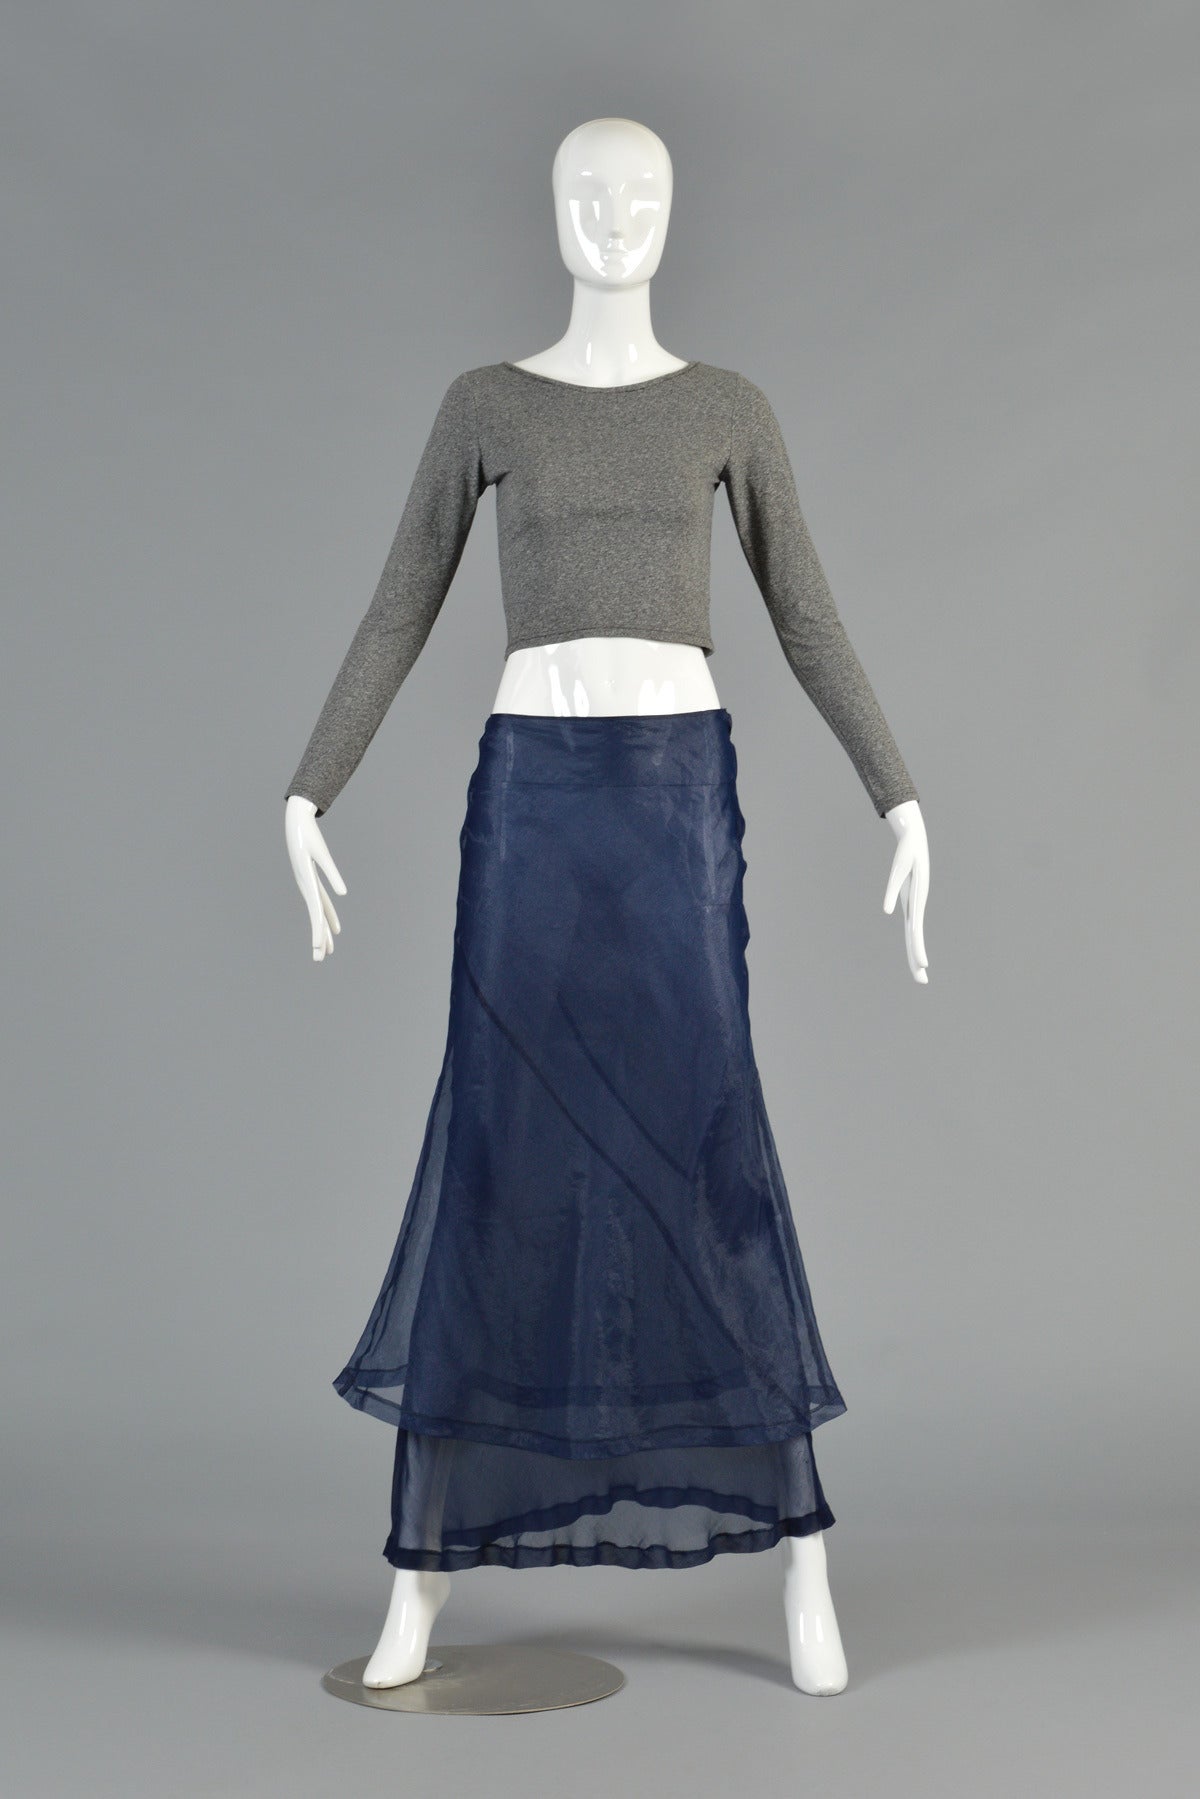 Killer A/D 1997 Comme des Garcons bi-level maxi skirt. Exquisite semi-sheer  shimmery blueberry color.  Crinkled synthetic.  High waist with side zipper. Unworn vintage condition. 

MEASUREMENTS
Waist: 28